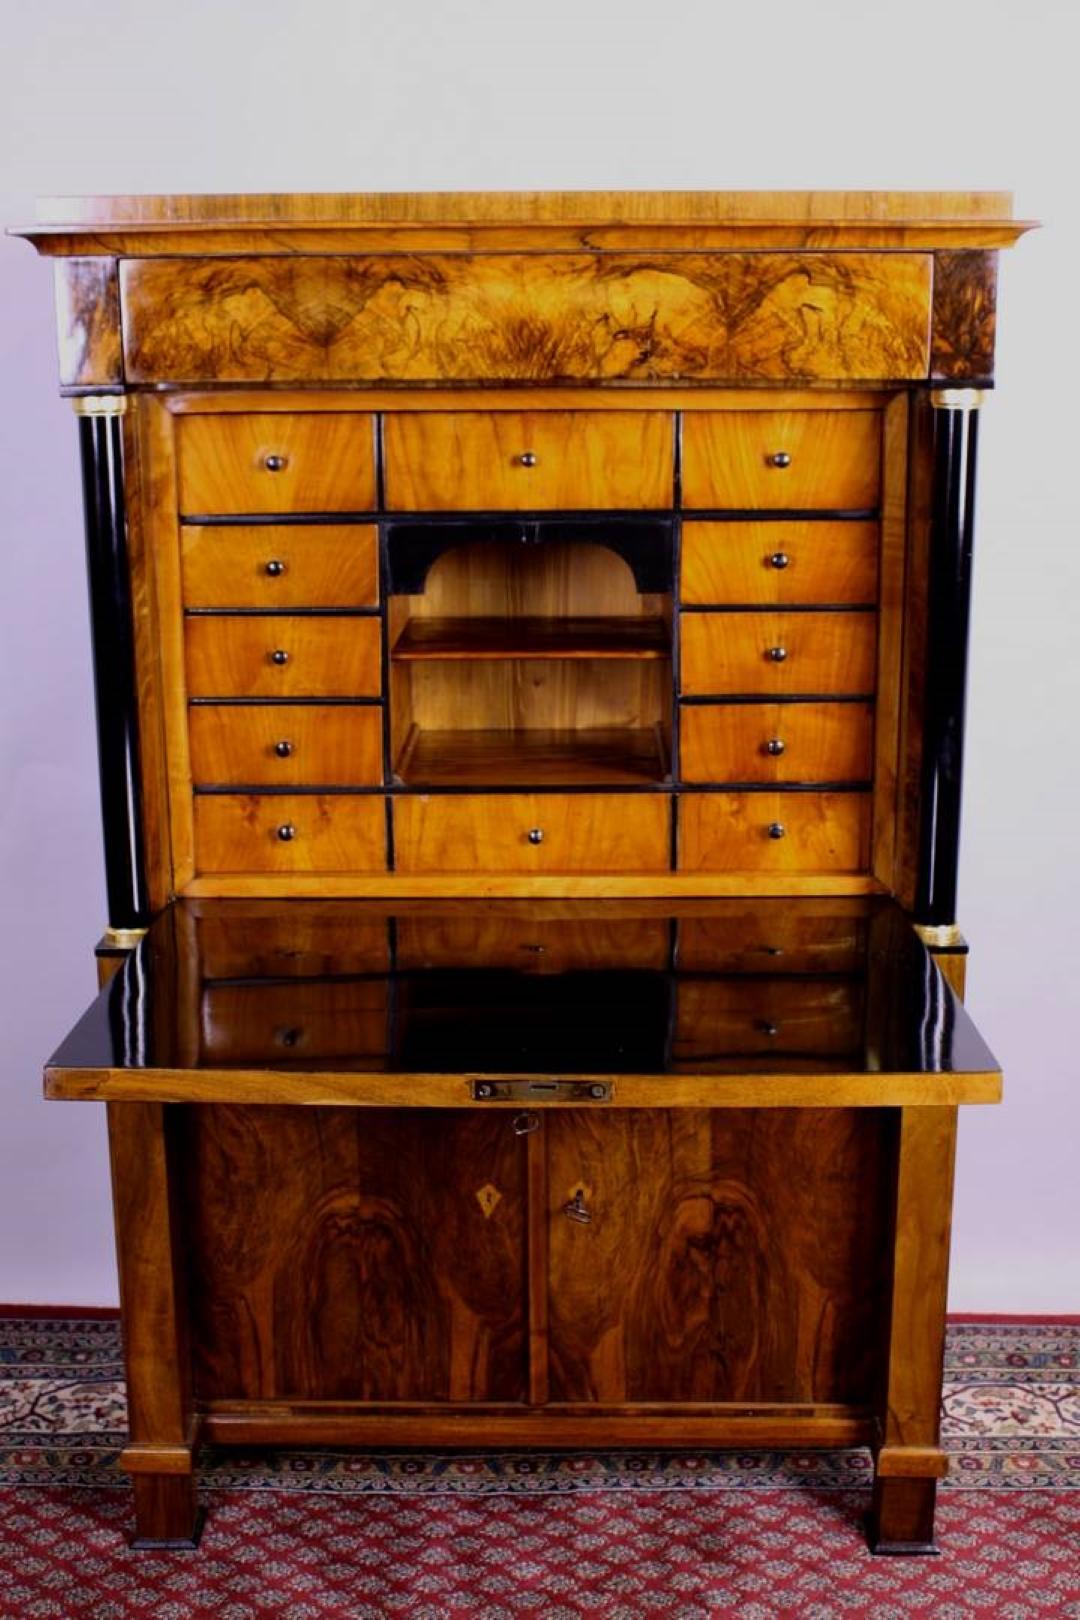 Original antique Biedermeier secretaire or bureau with beautifully ebonized framing columns. This unique single piece from the 1860s convinces with its amazing red-brown cherrywood veneer and the hand-polished shellac finish. In a restored, perfect